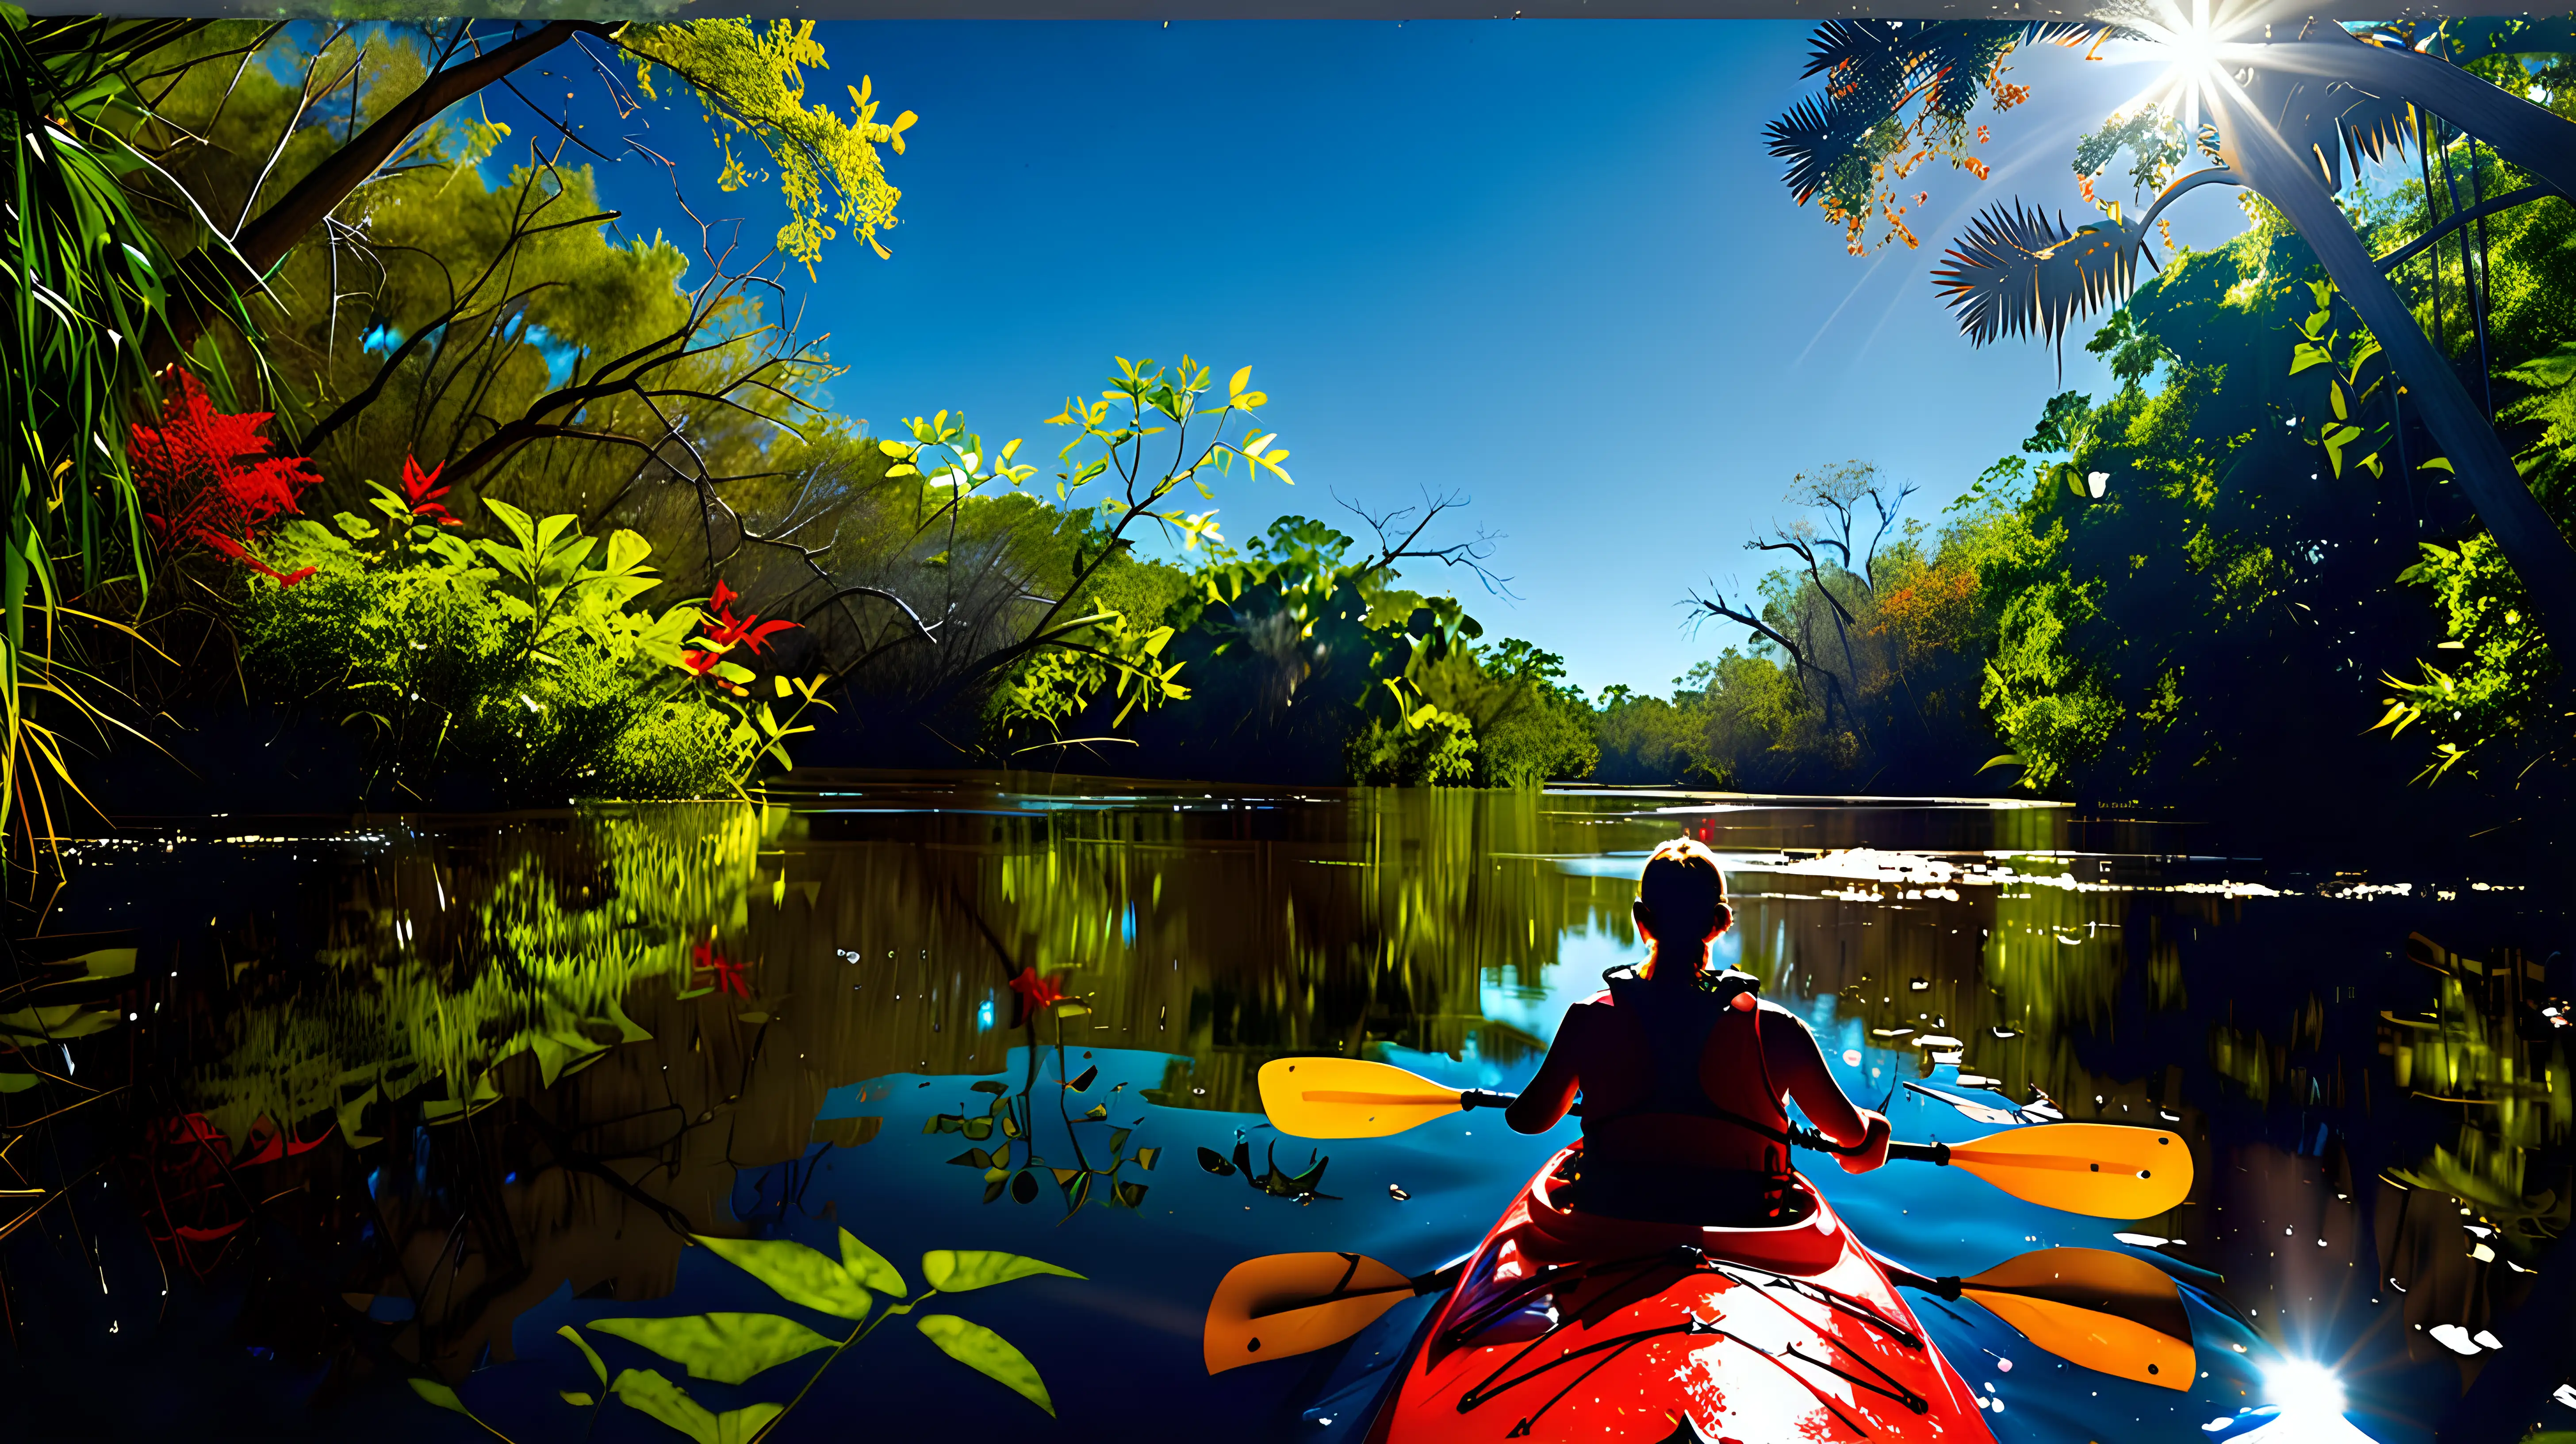 /imagine prompt: A person in a red kayak navigating the gentle currents of the Santa Fe River in Florida. The scene is alive with vibrant greenery of the riverbanks and the clear blue sky above. The sunlight filters through the canopy, casting dappled light on the kayaker. Created Using: high-resolution photography, natural colors, dynamic composition, sunlight effects, clear blue sky, vibrant riverbank flora, serene water --ar 16:9 --v 6.0